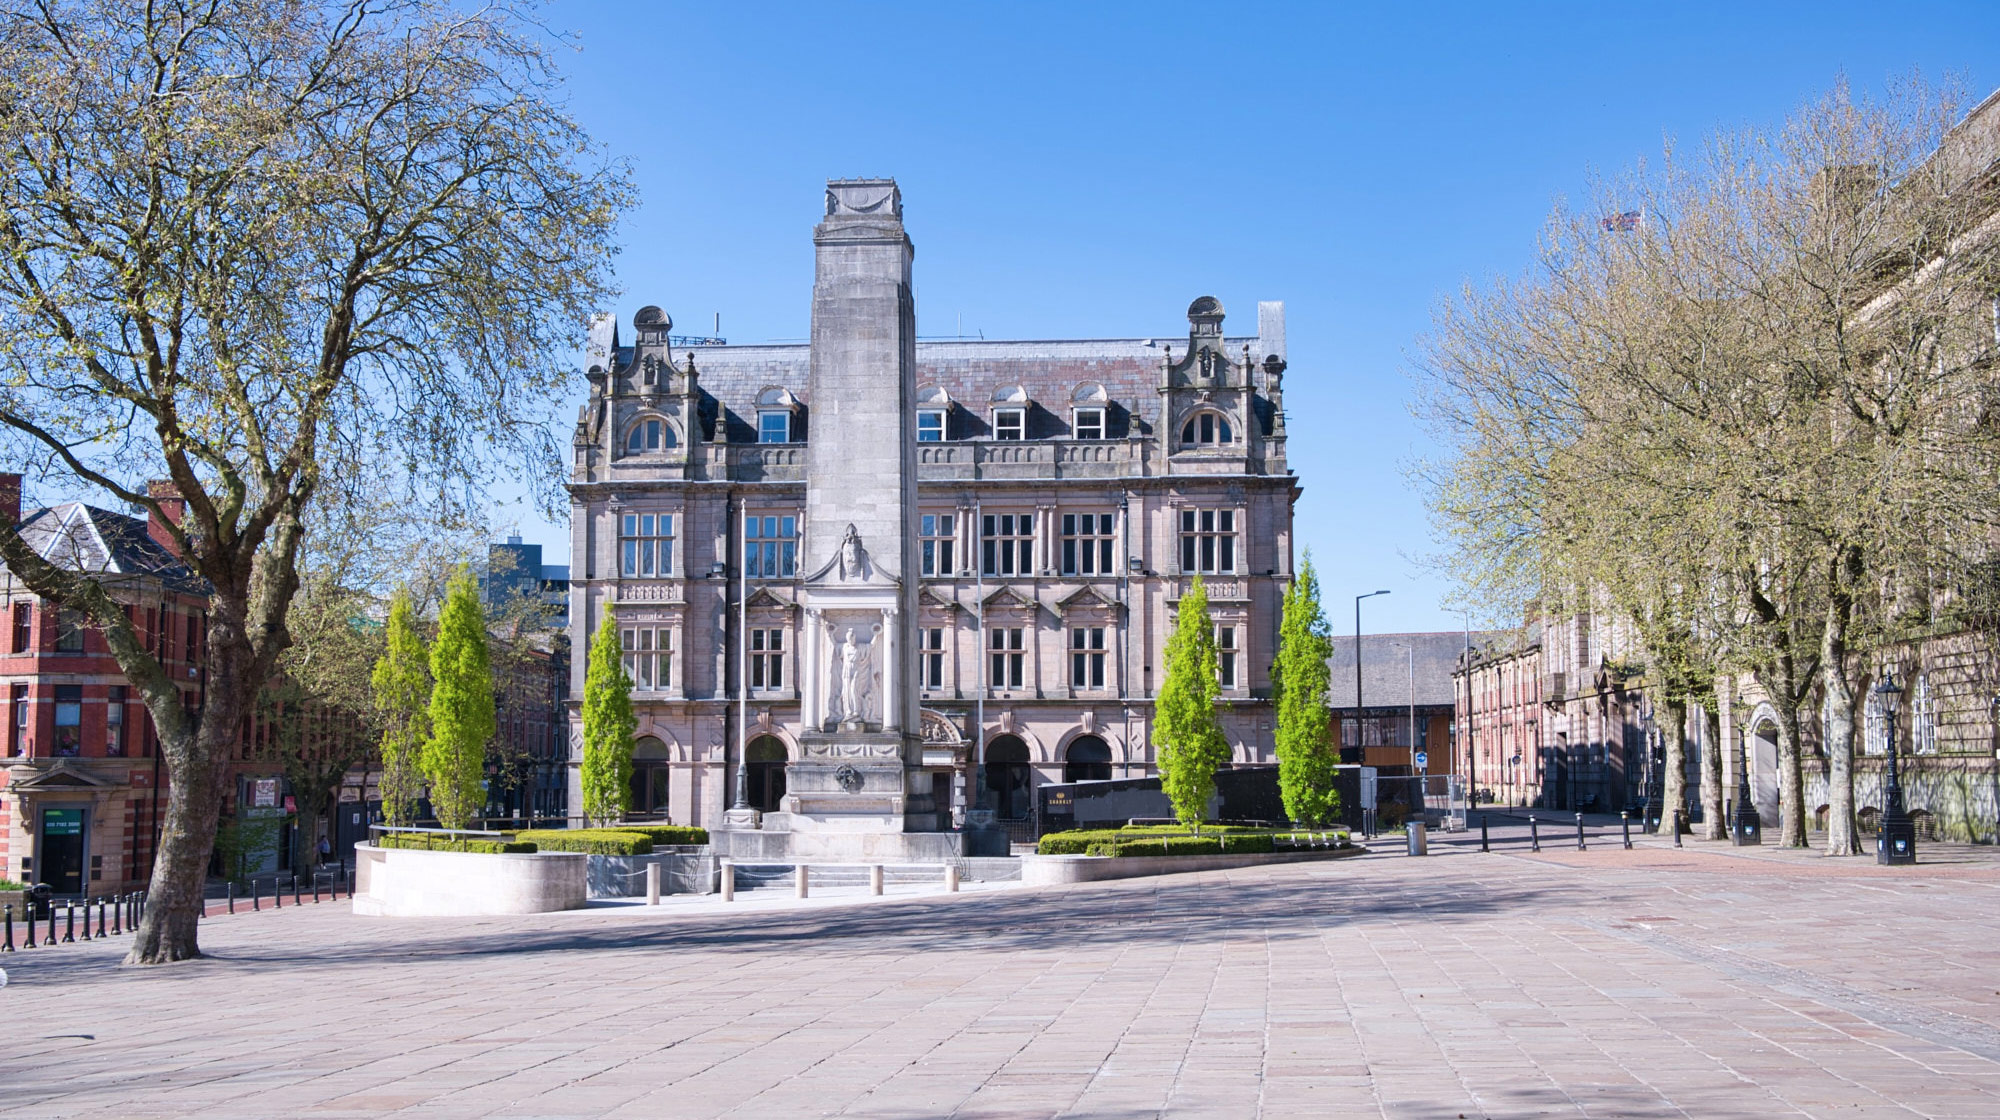 Preston Cenotaph and old Post Office - April 2020